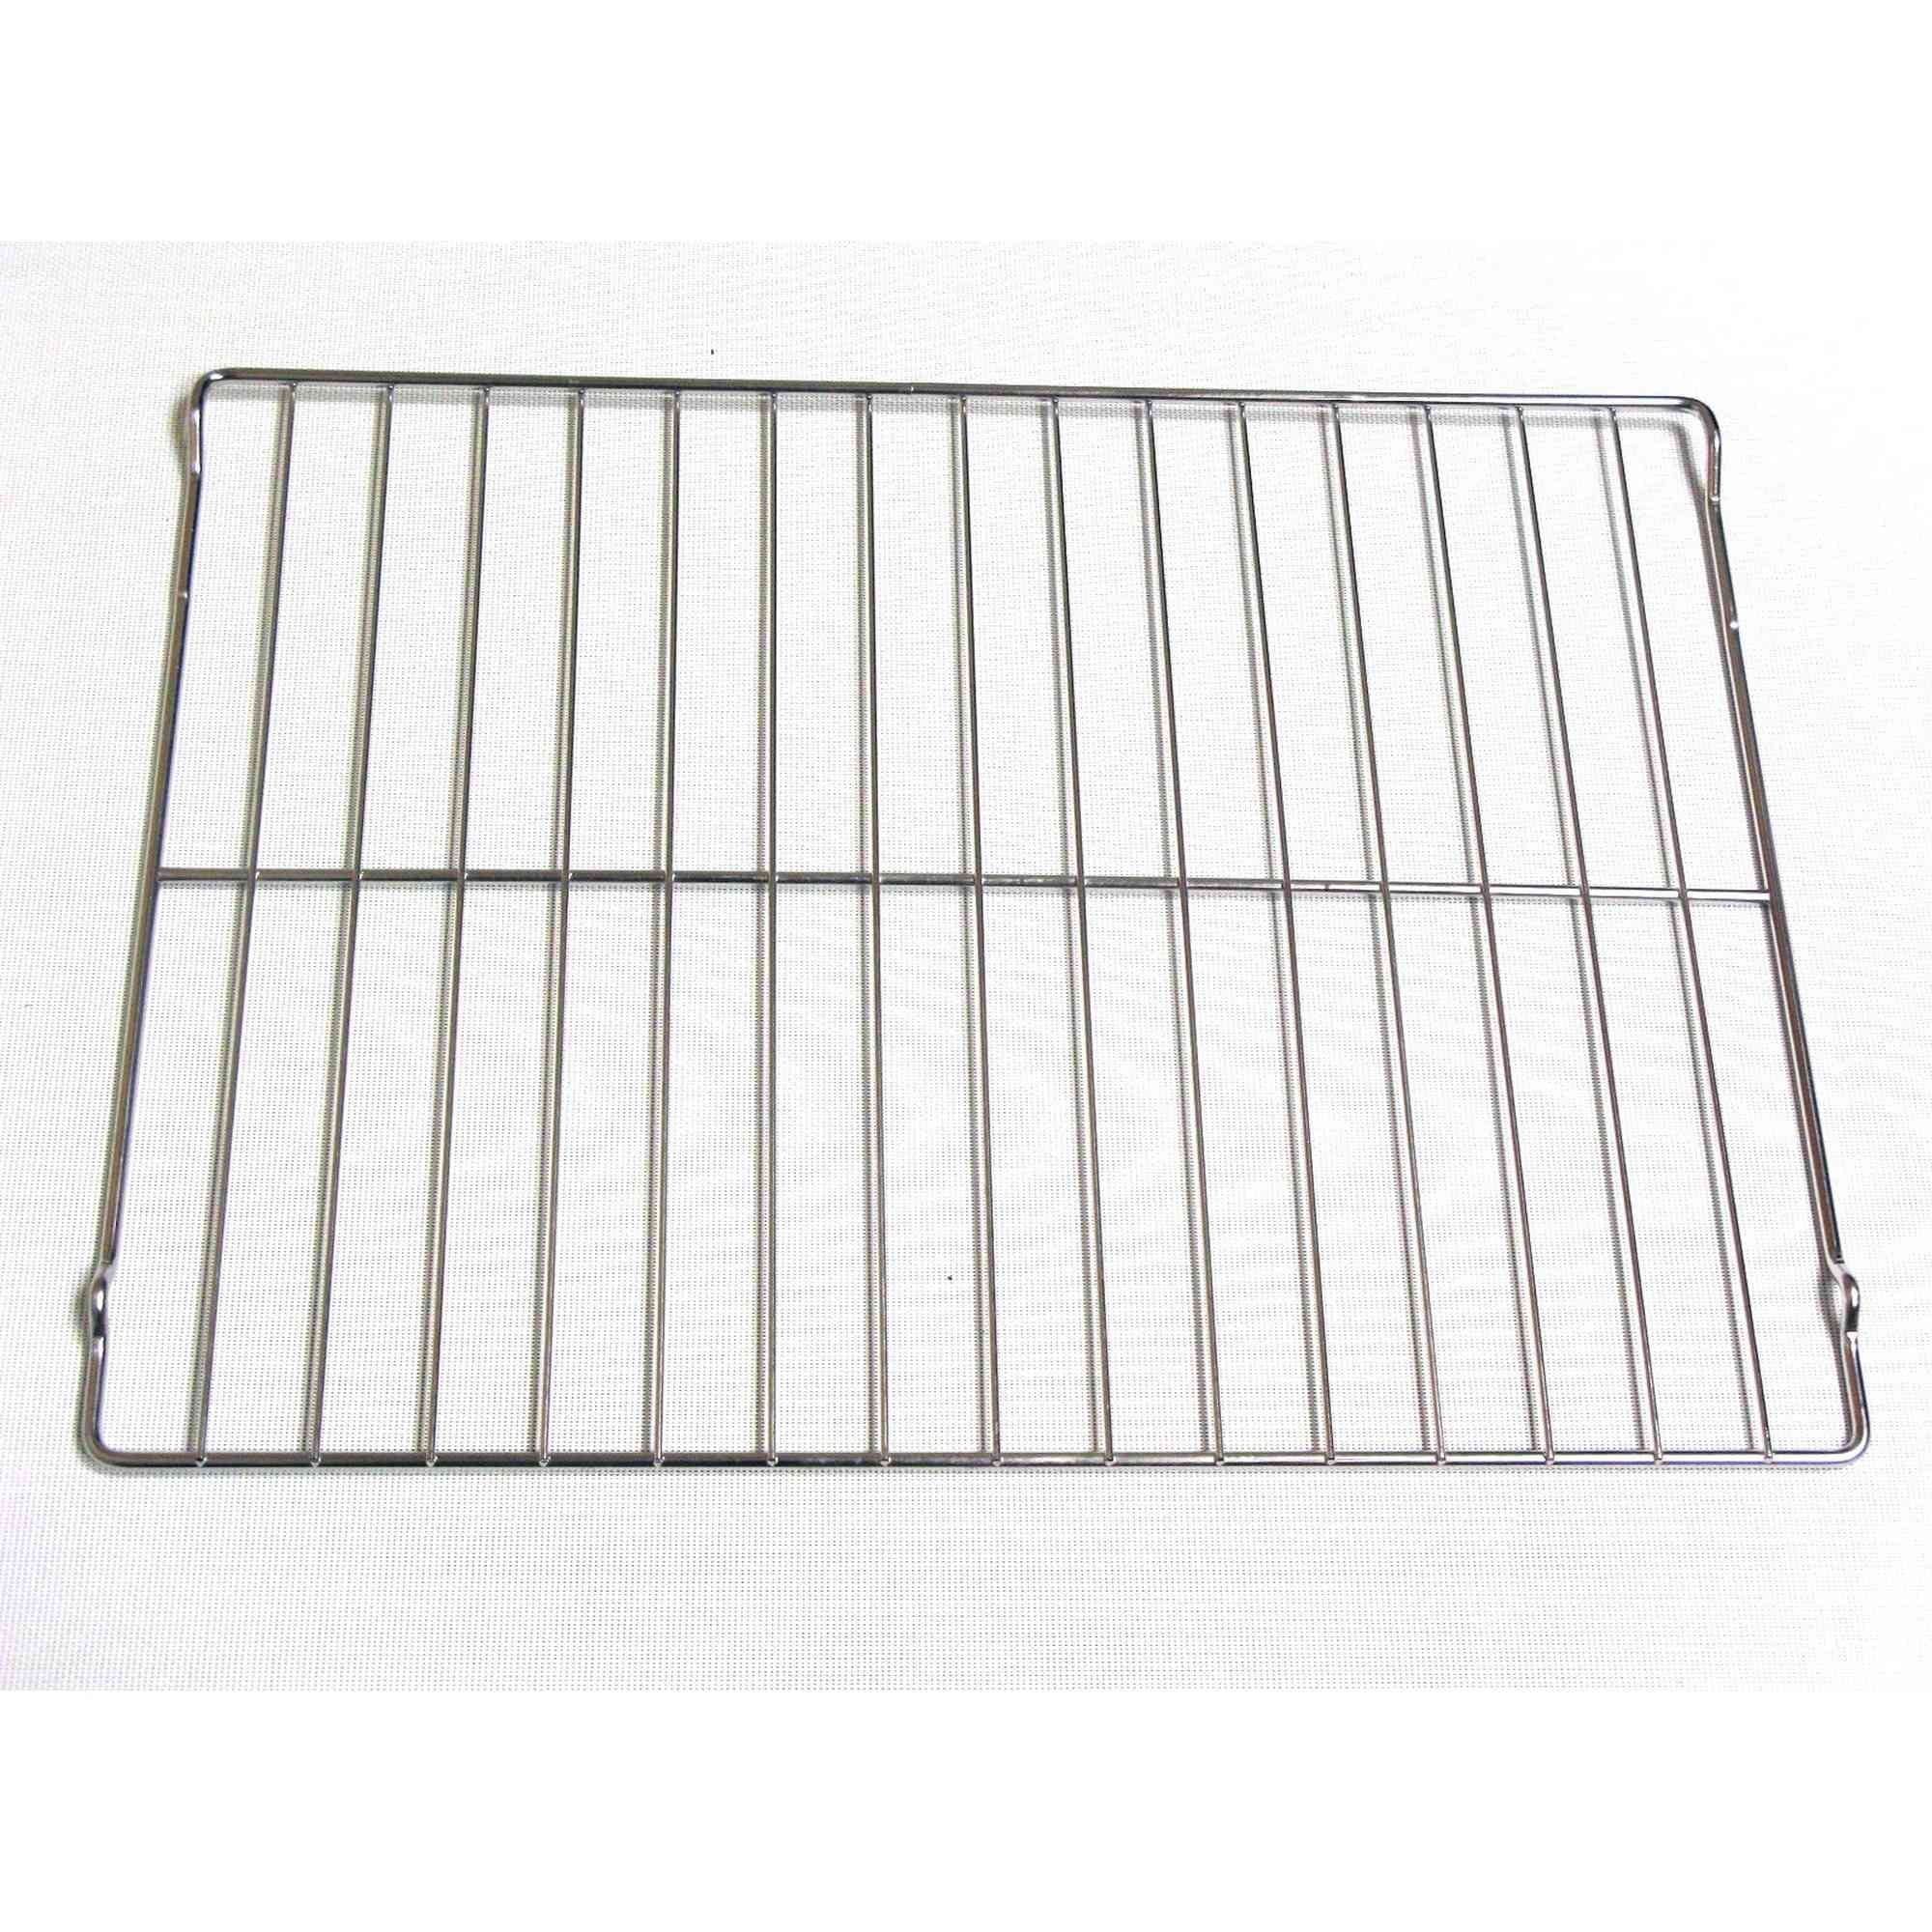 2 X Servis Universal Extendable Oven/Cooker/Grill Shelves *Free Delivery* 